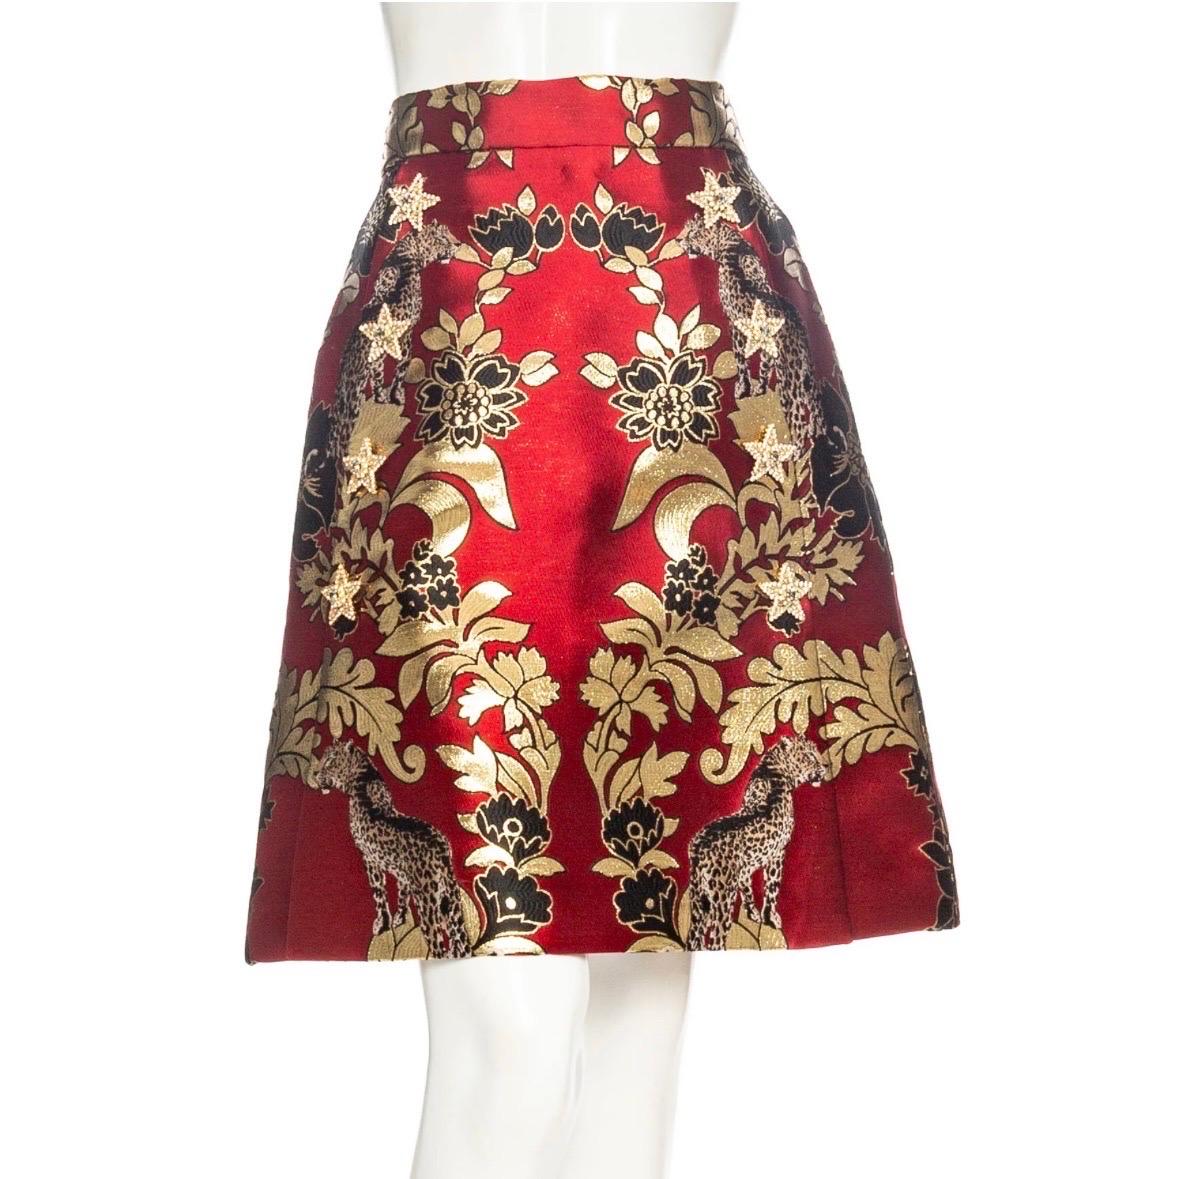 Dolce & Gabbana Gold and Red Leopard Motif Jacquard Jacket and Skirt Set For Sale 6